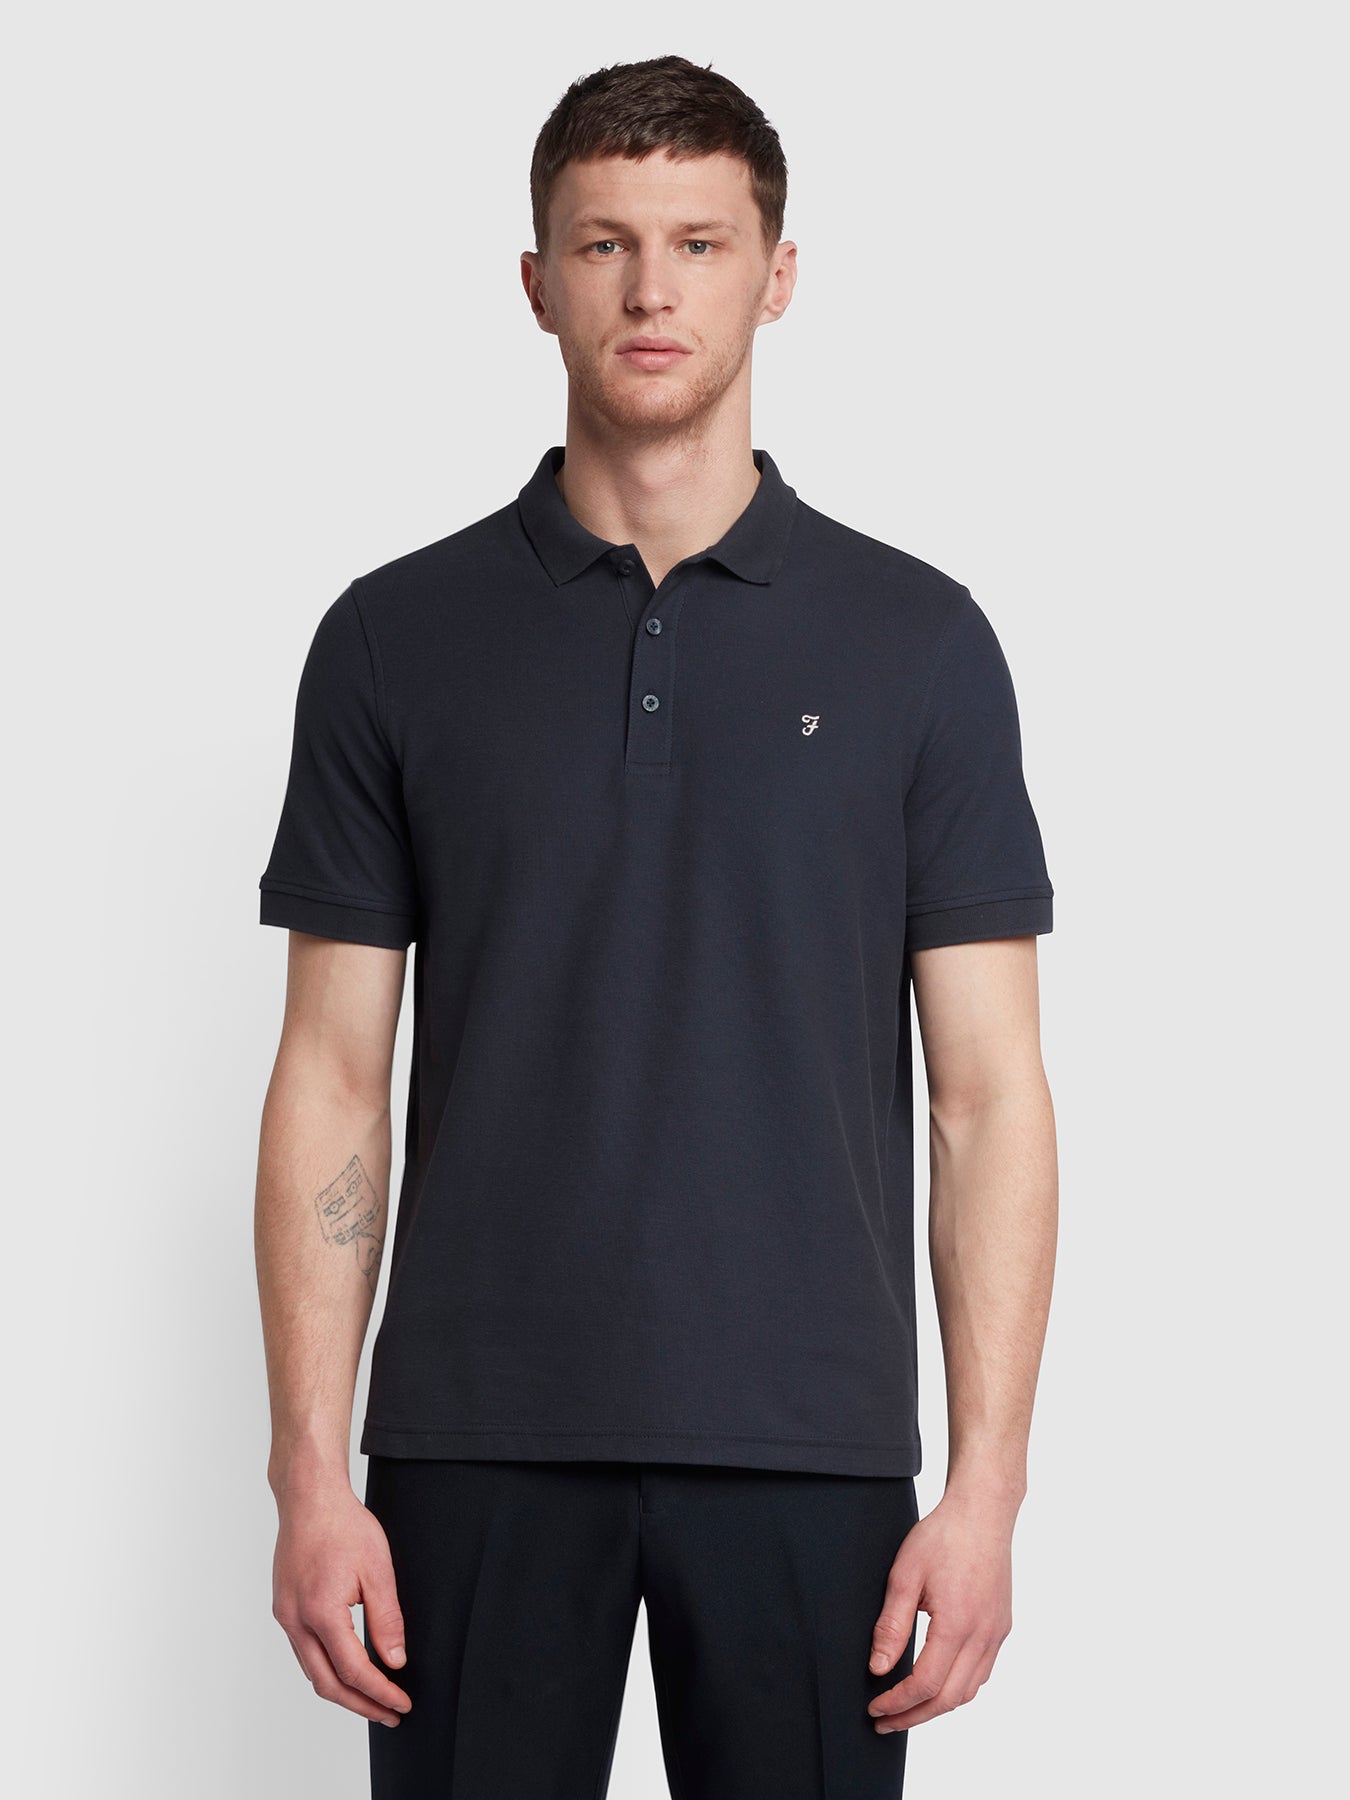 View Cove Short Sleeve Polo Shirt In True Navy information